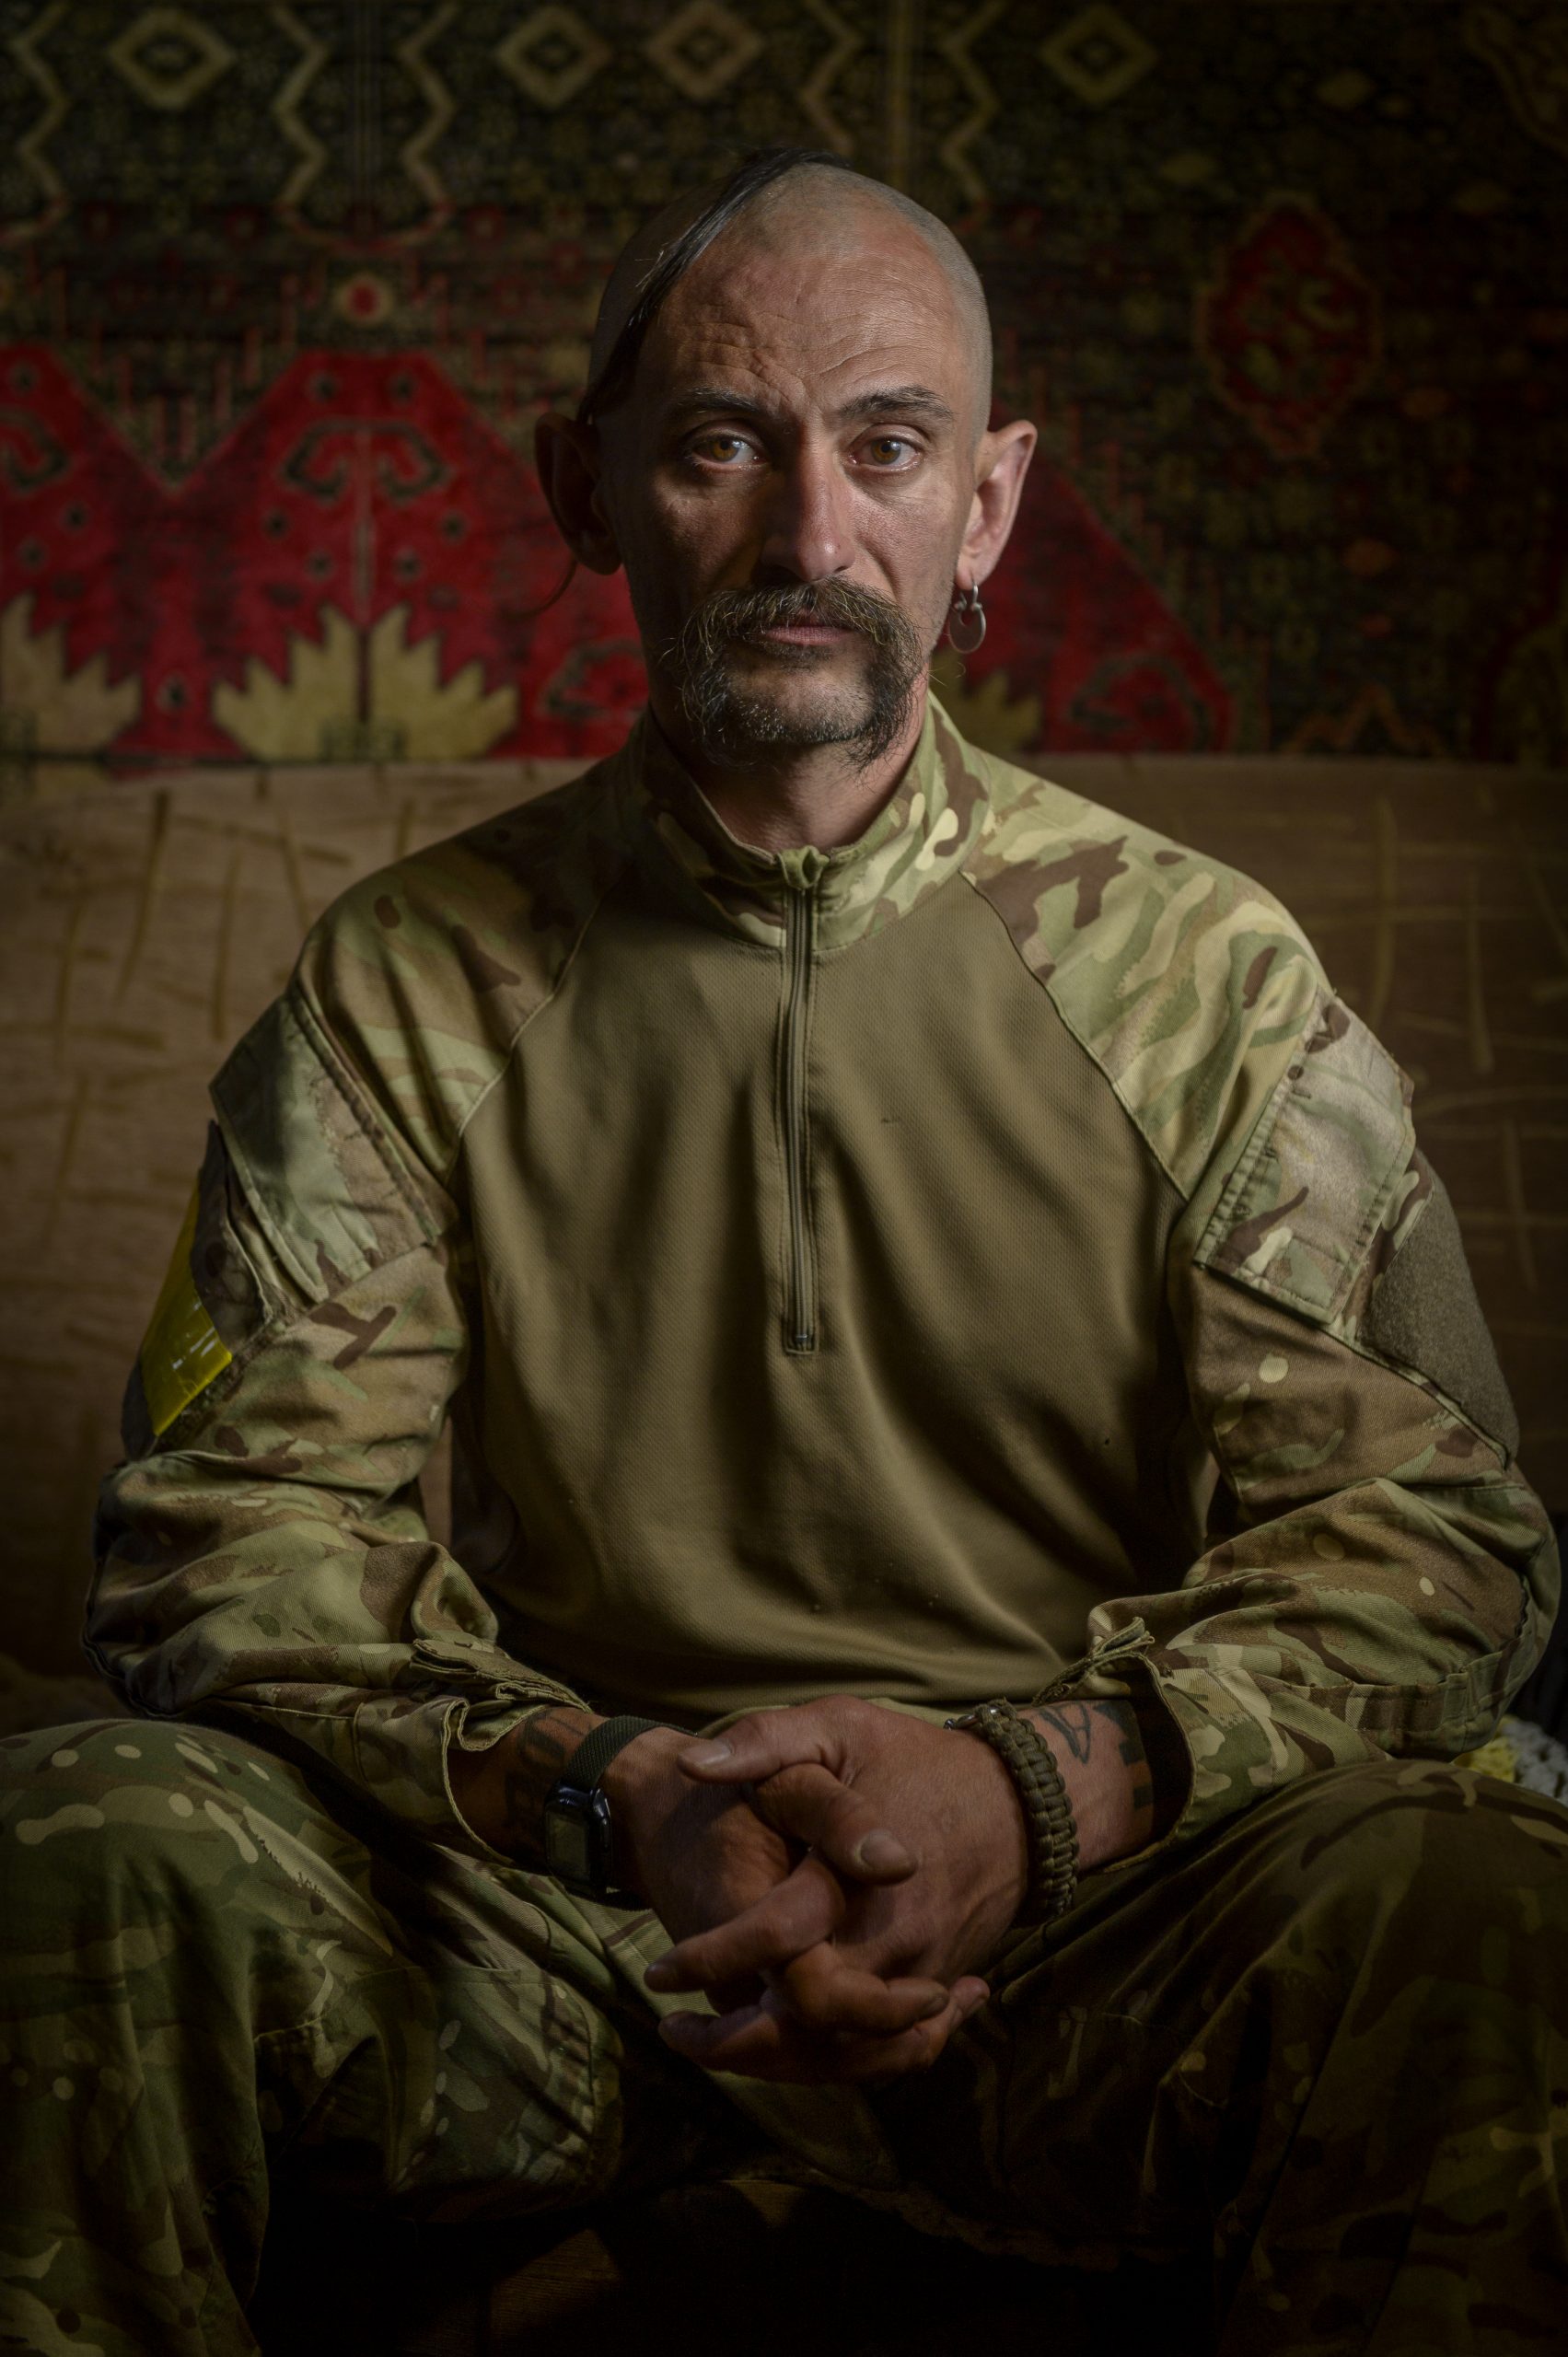 Photo of Ukrainian soldier from the 2nd Battalion / DUK by Christopher Occhicone